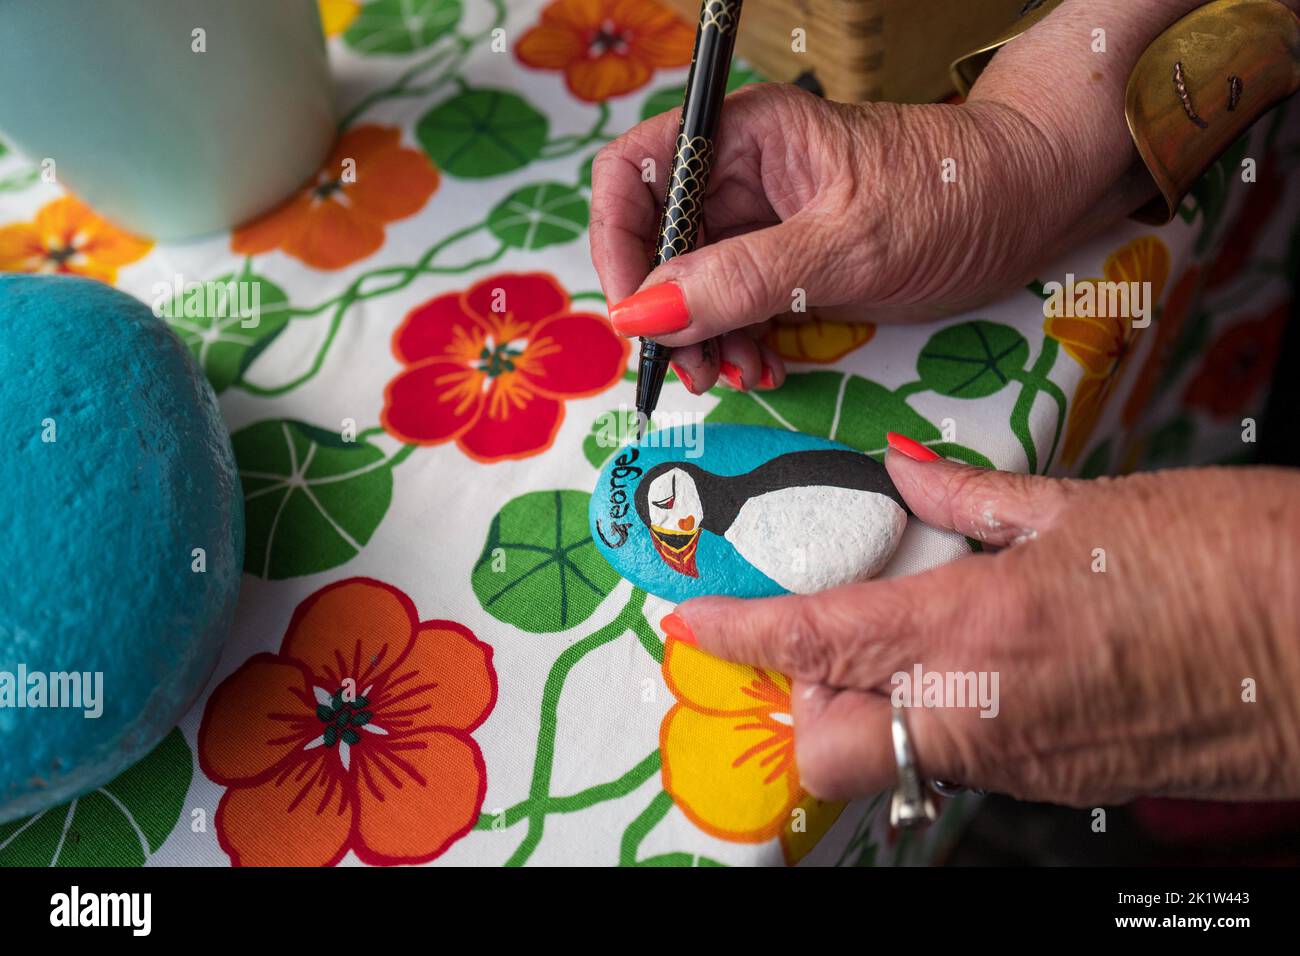 Female artist writing the name George with a black felt pen onto a painted stone with a puffin at a market stall. Stock Photo